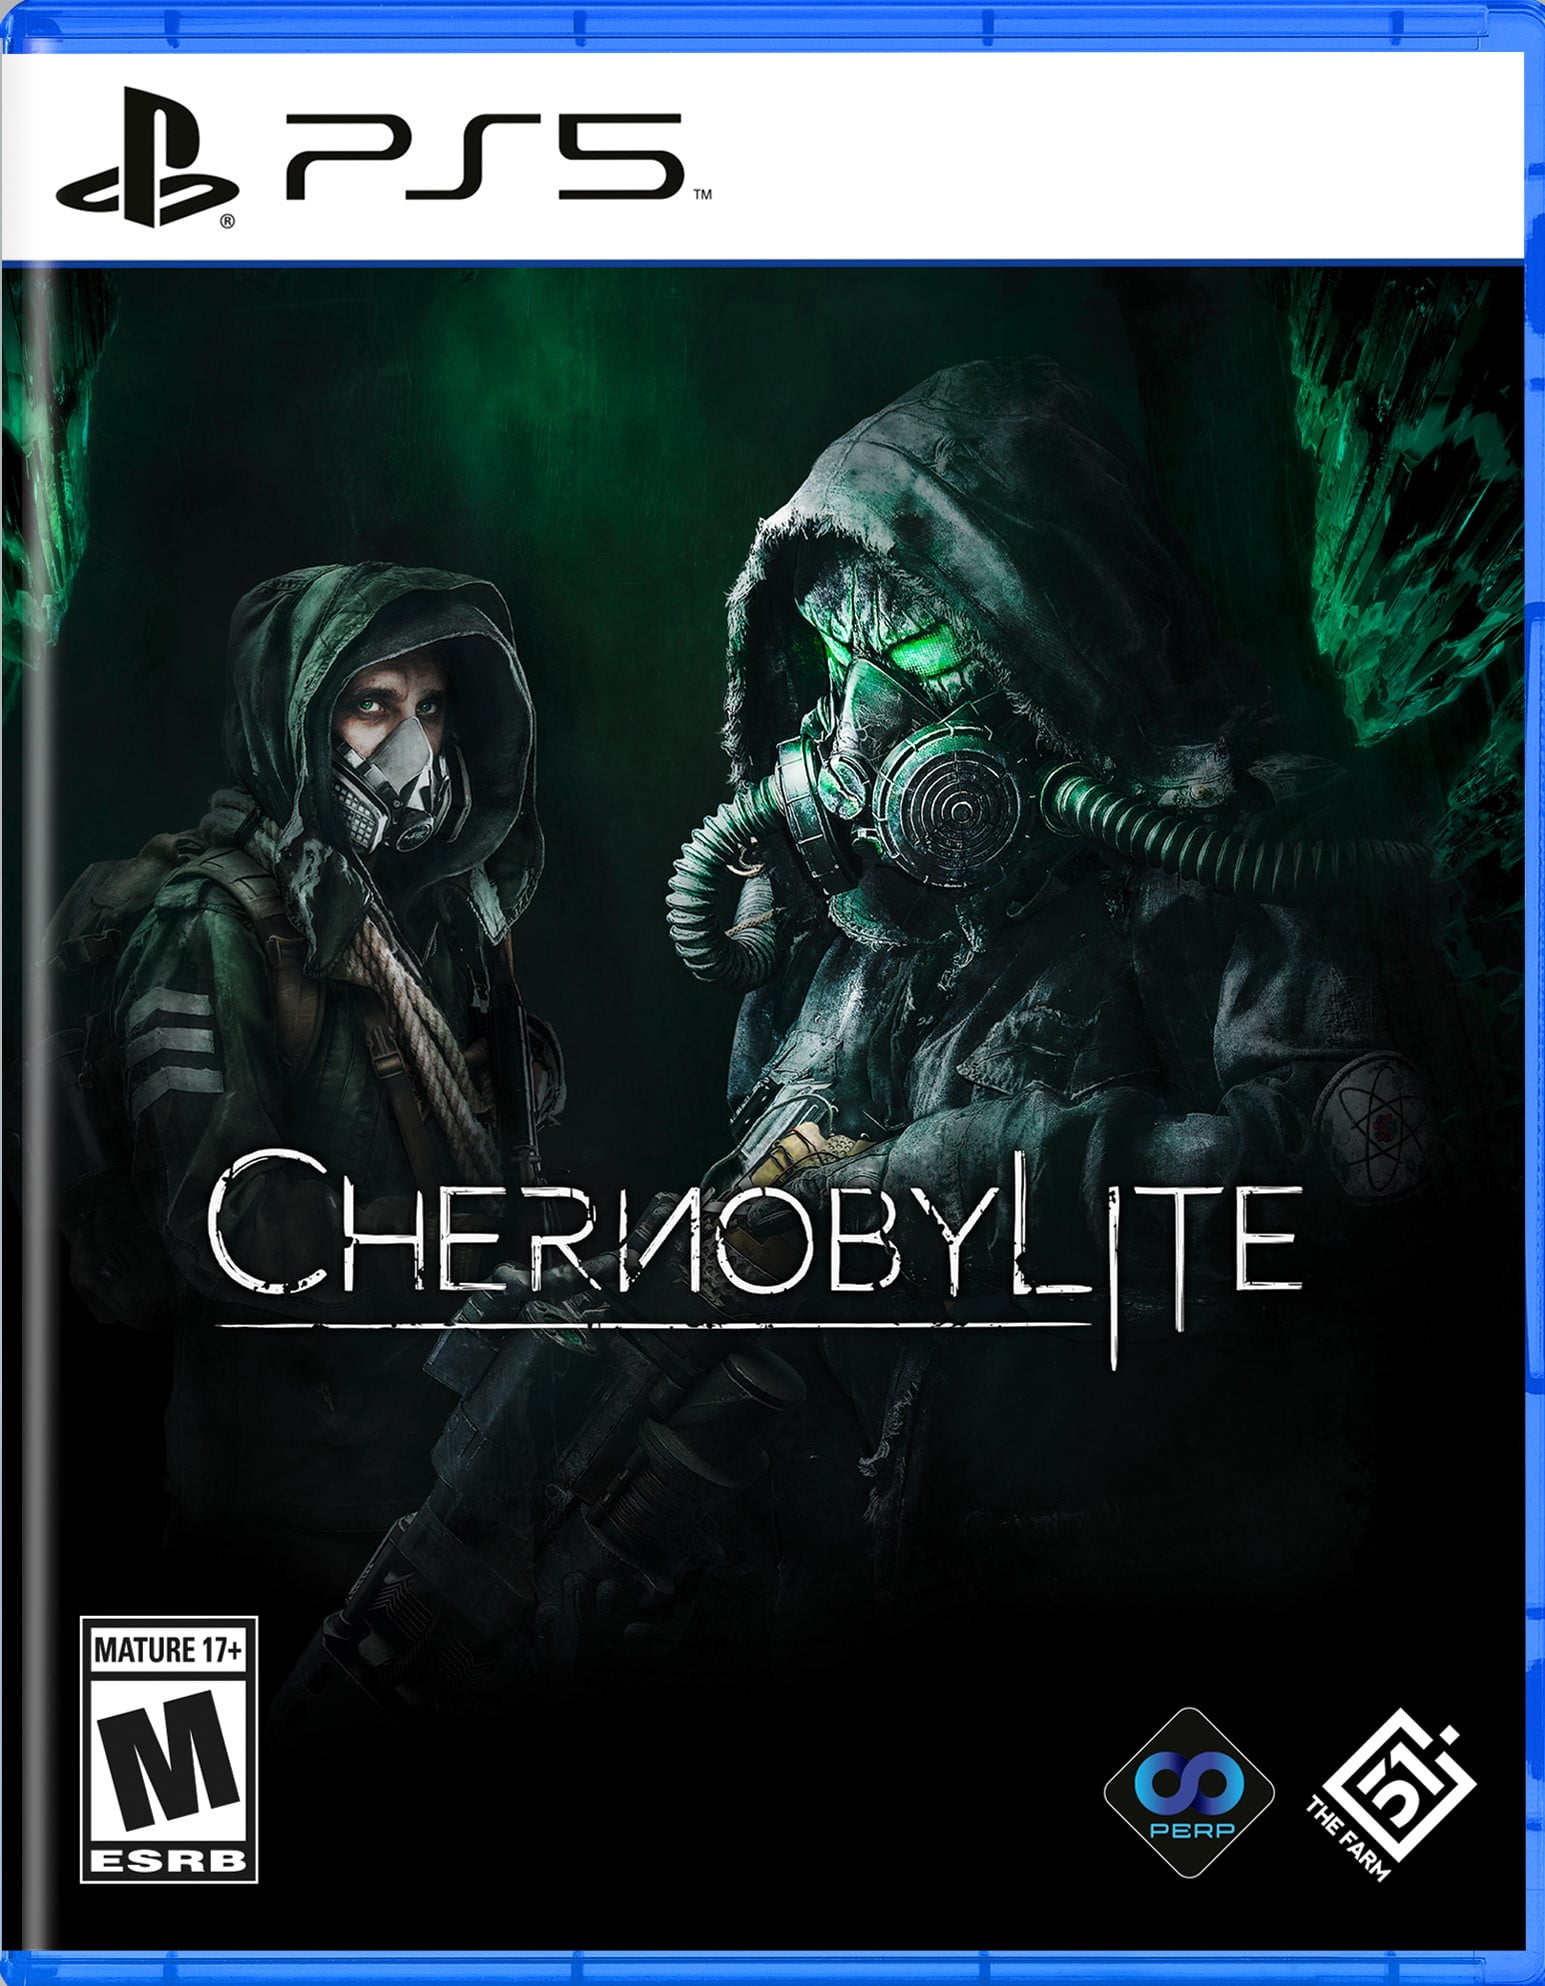 Perp Games, 5, The PlayStation 812303016639 Chernobylite, 51, Farm